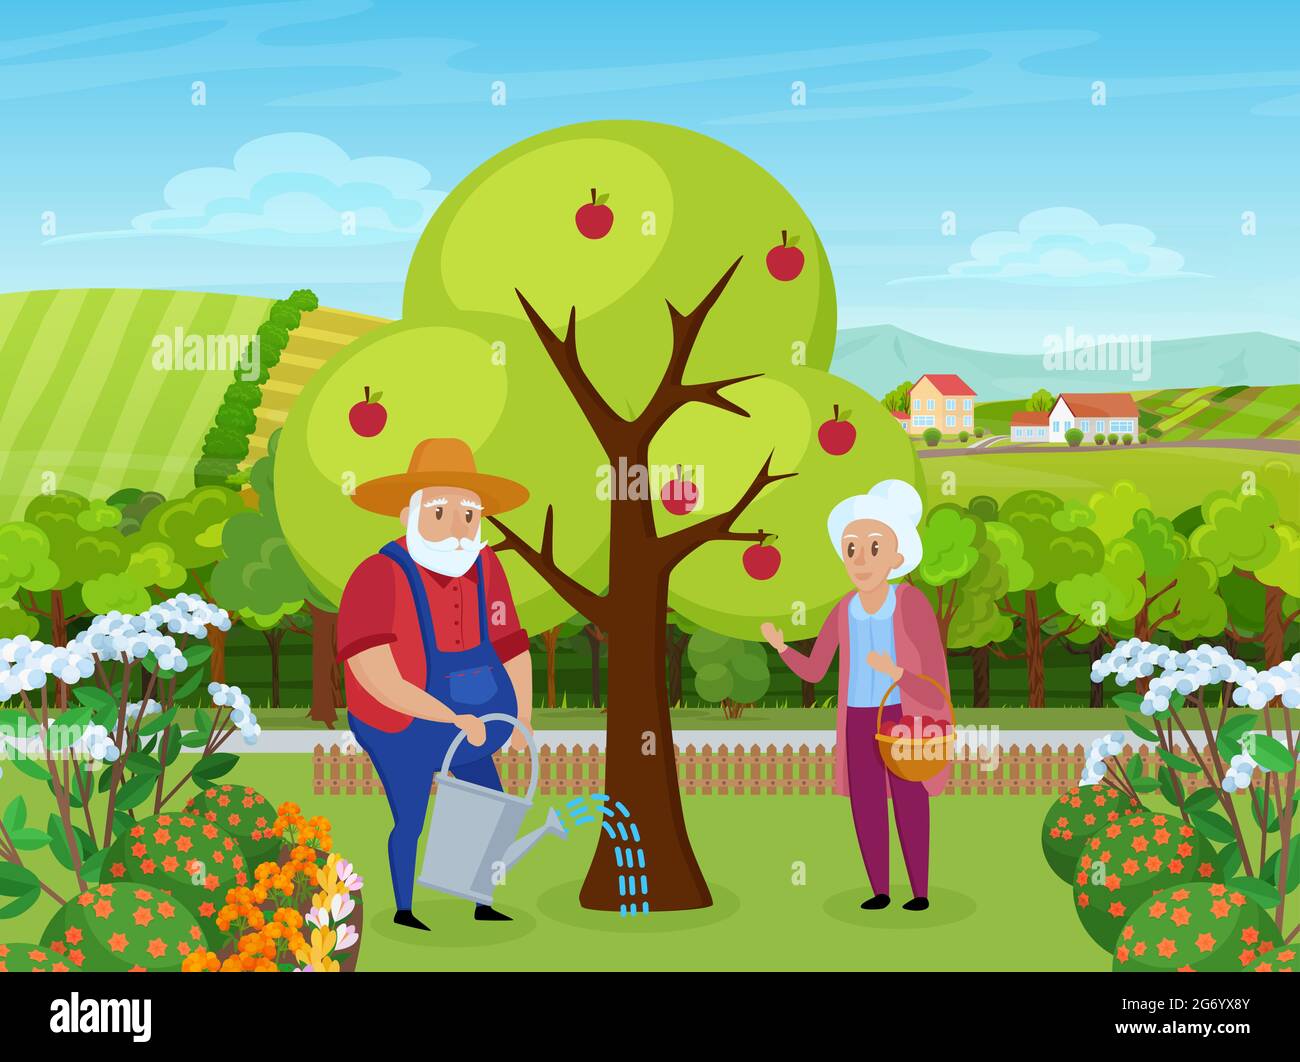 Elderly couple people work in farm garden vector illustration. Cartoon senior man character in hat working, holding watering can to water apple tree, woman standing with basket of fruits background Stock Vector